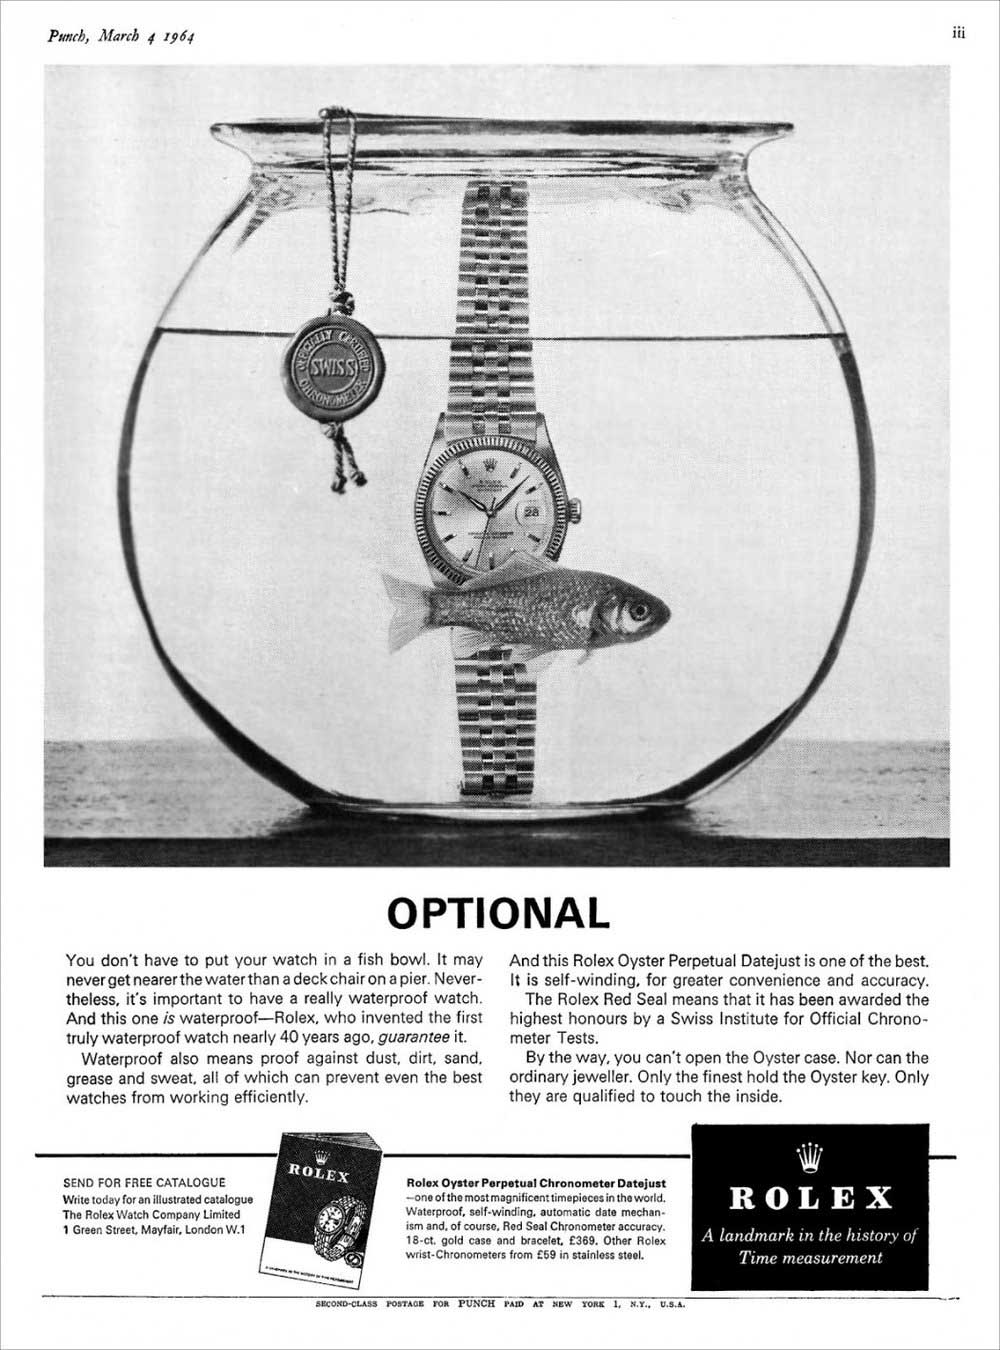 Magazine ad extolling the waterproof capability of the Oyster case